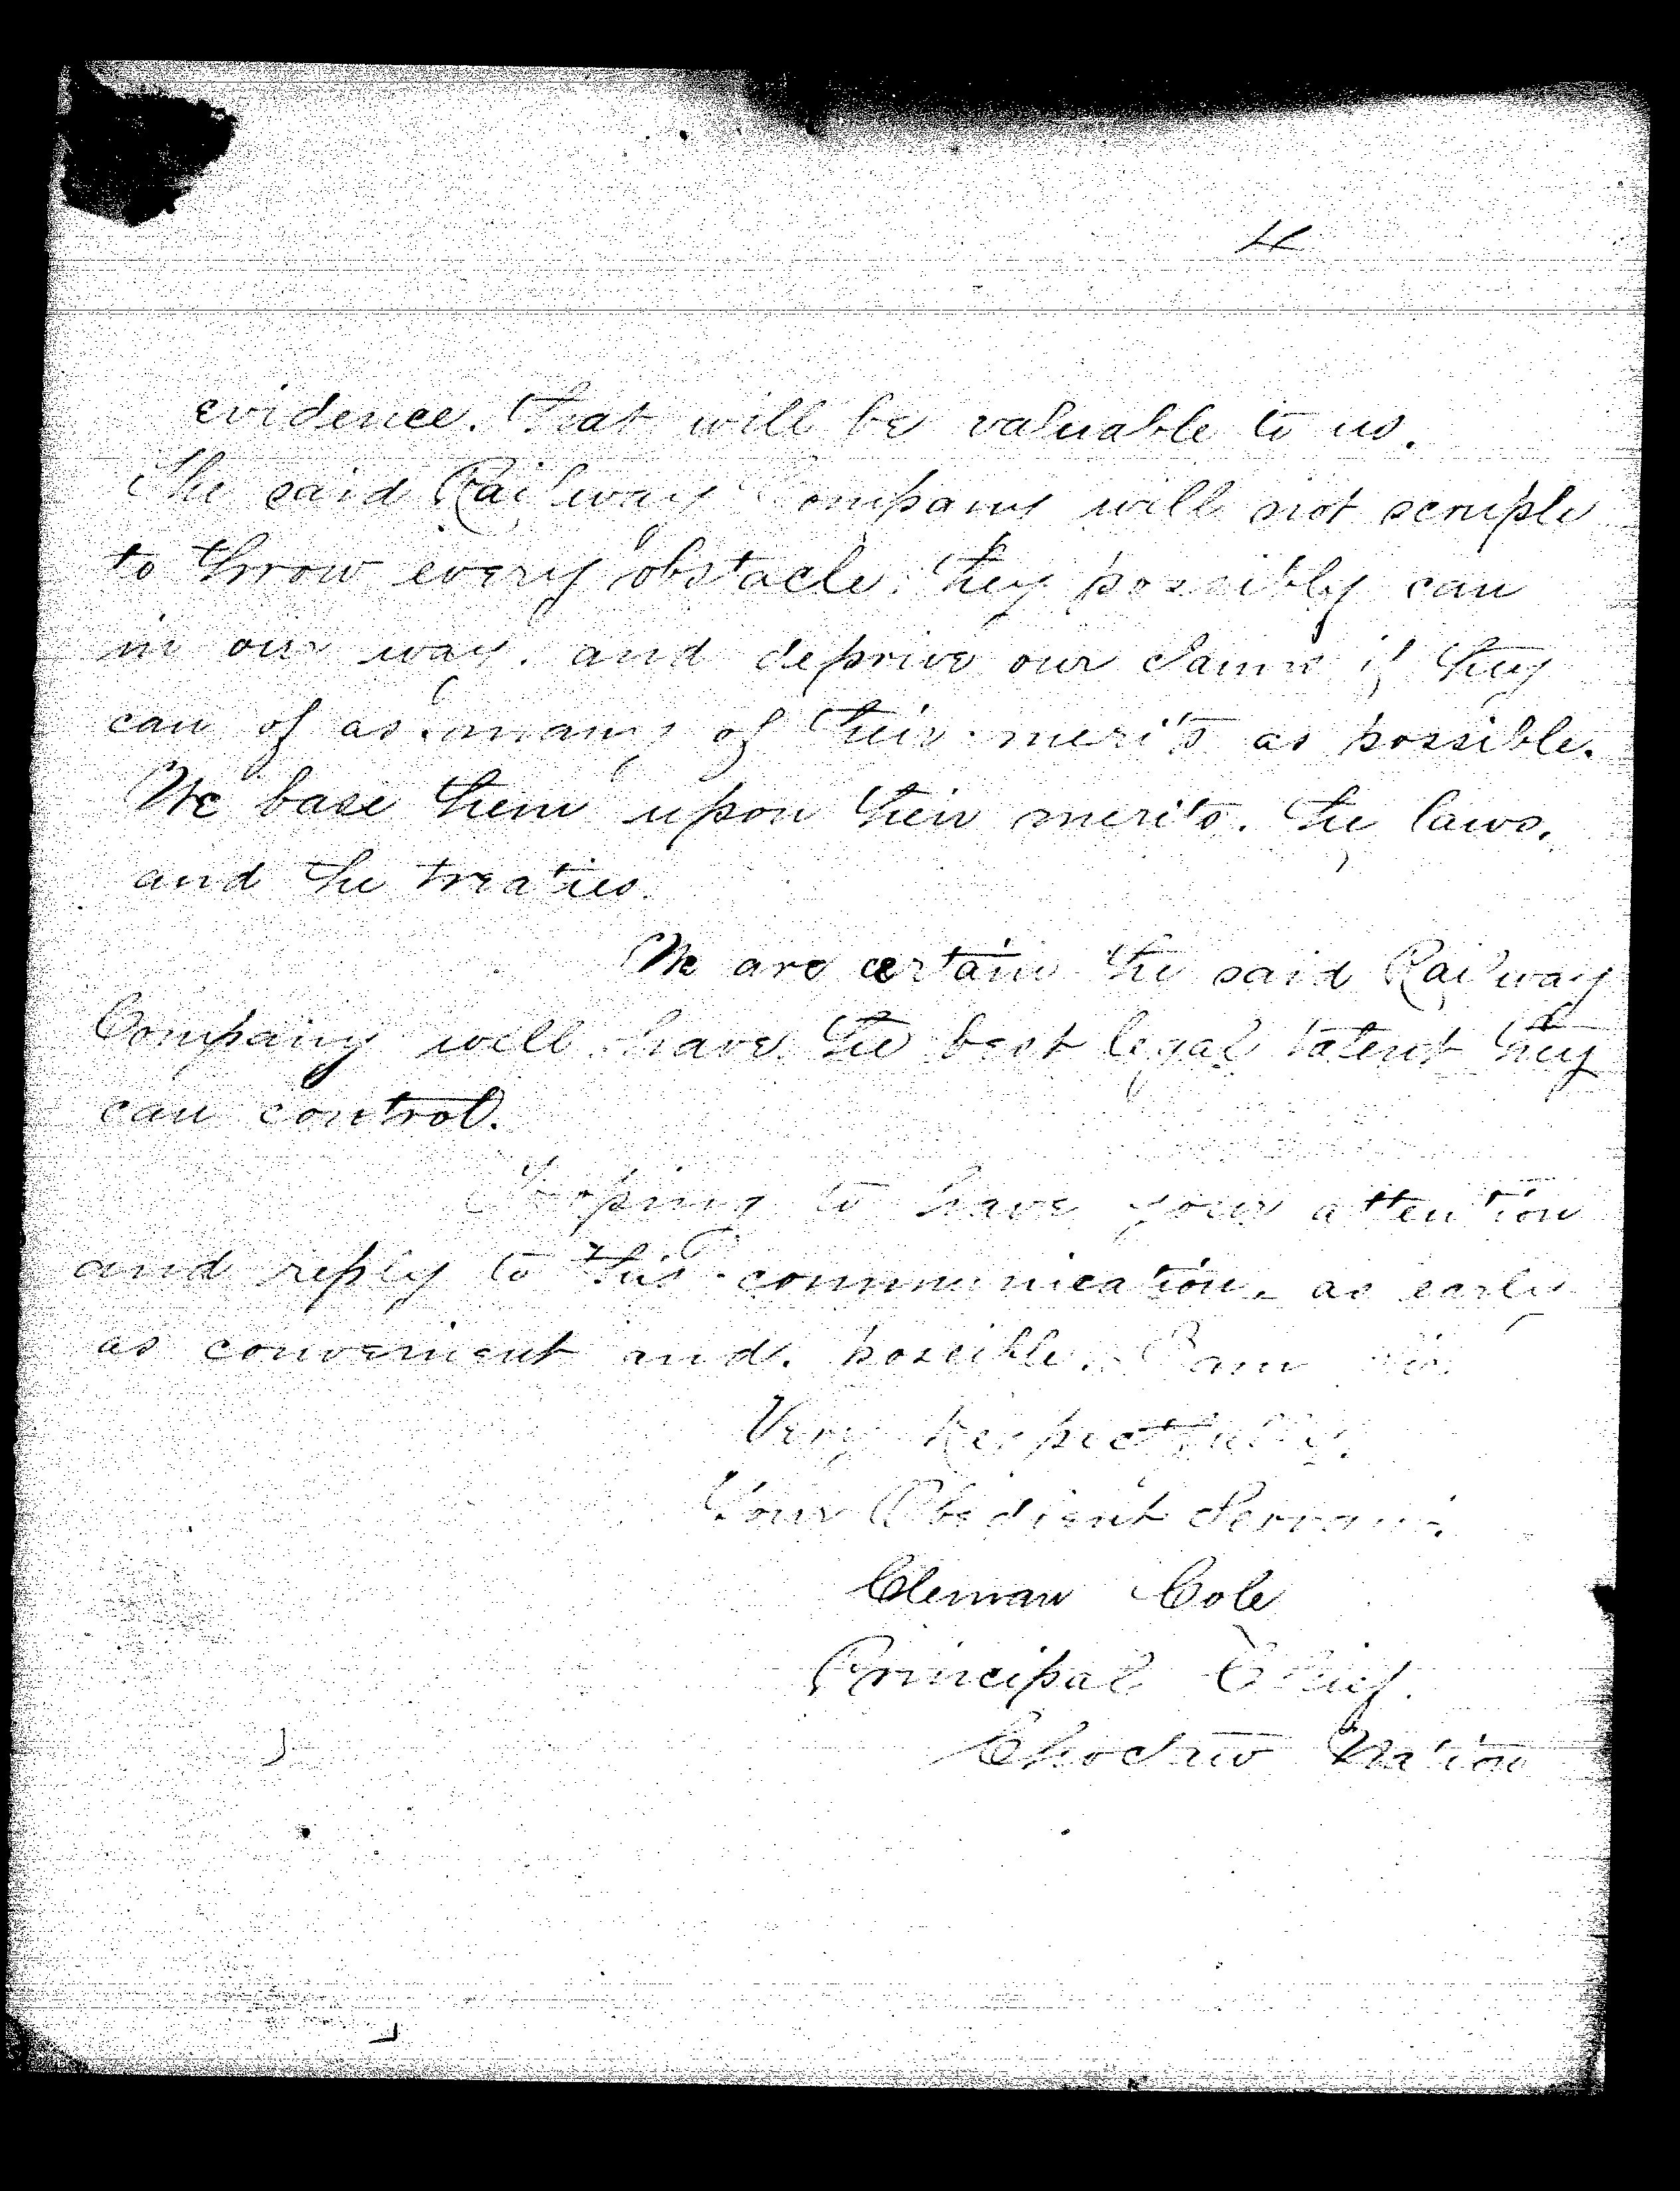 Letter to Grant